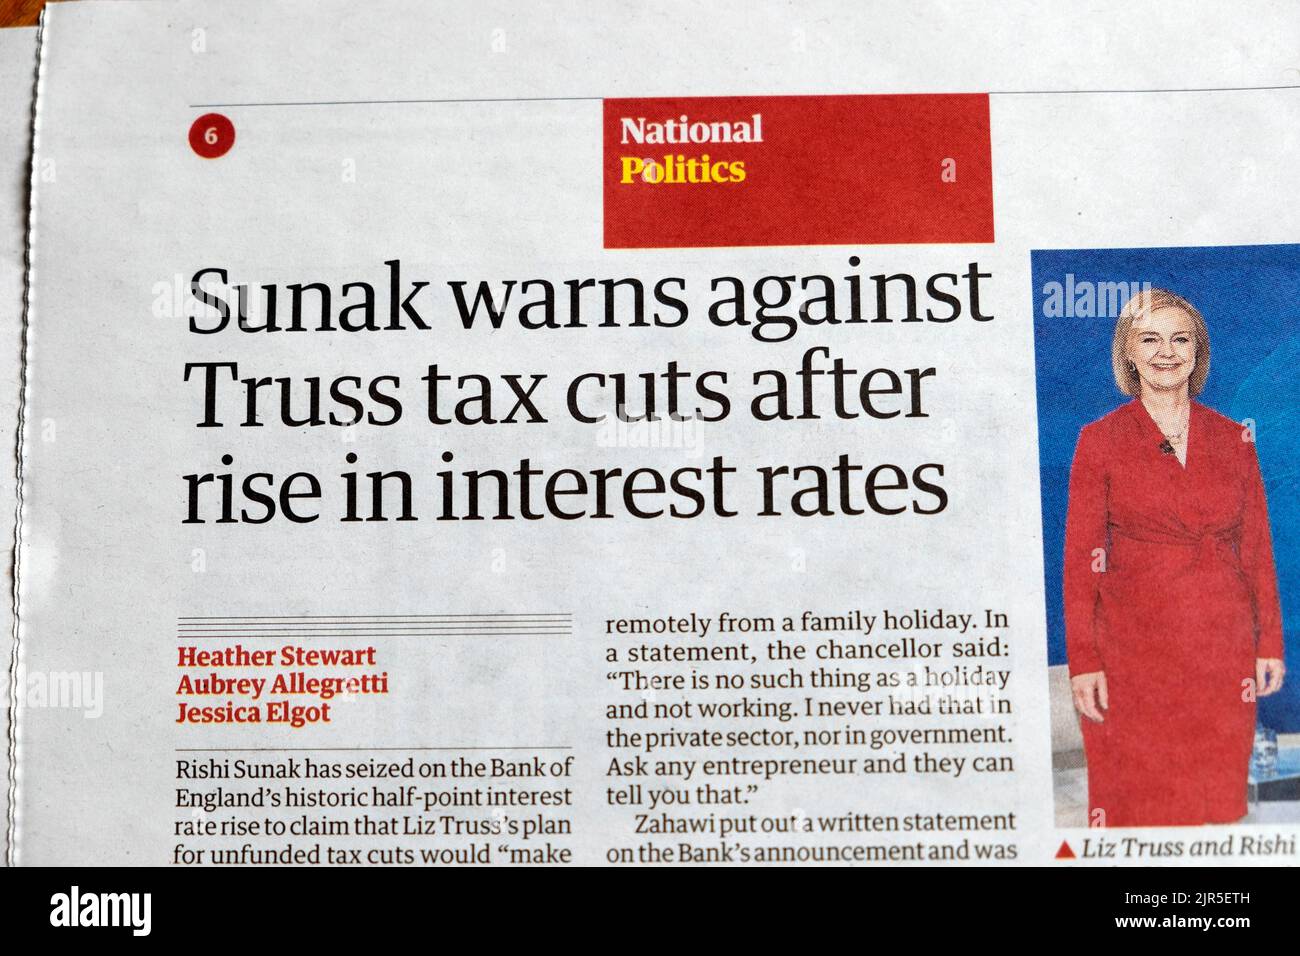 'Sunak warns against Truss tax cuts after rise in interest rates' Guardian newspaper headline Bank of England 2022 clipping article London England UK Stock Photo